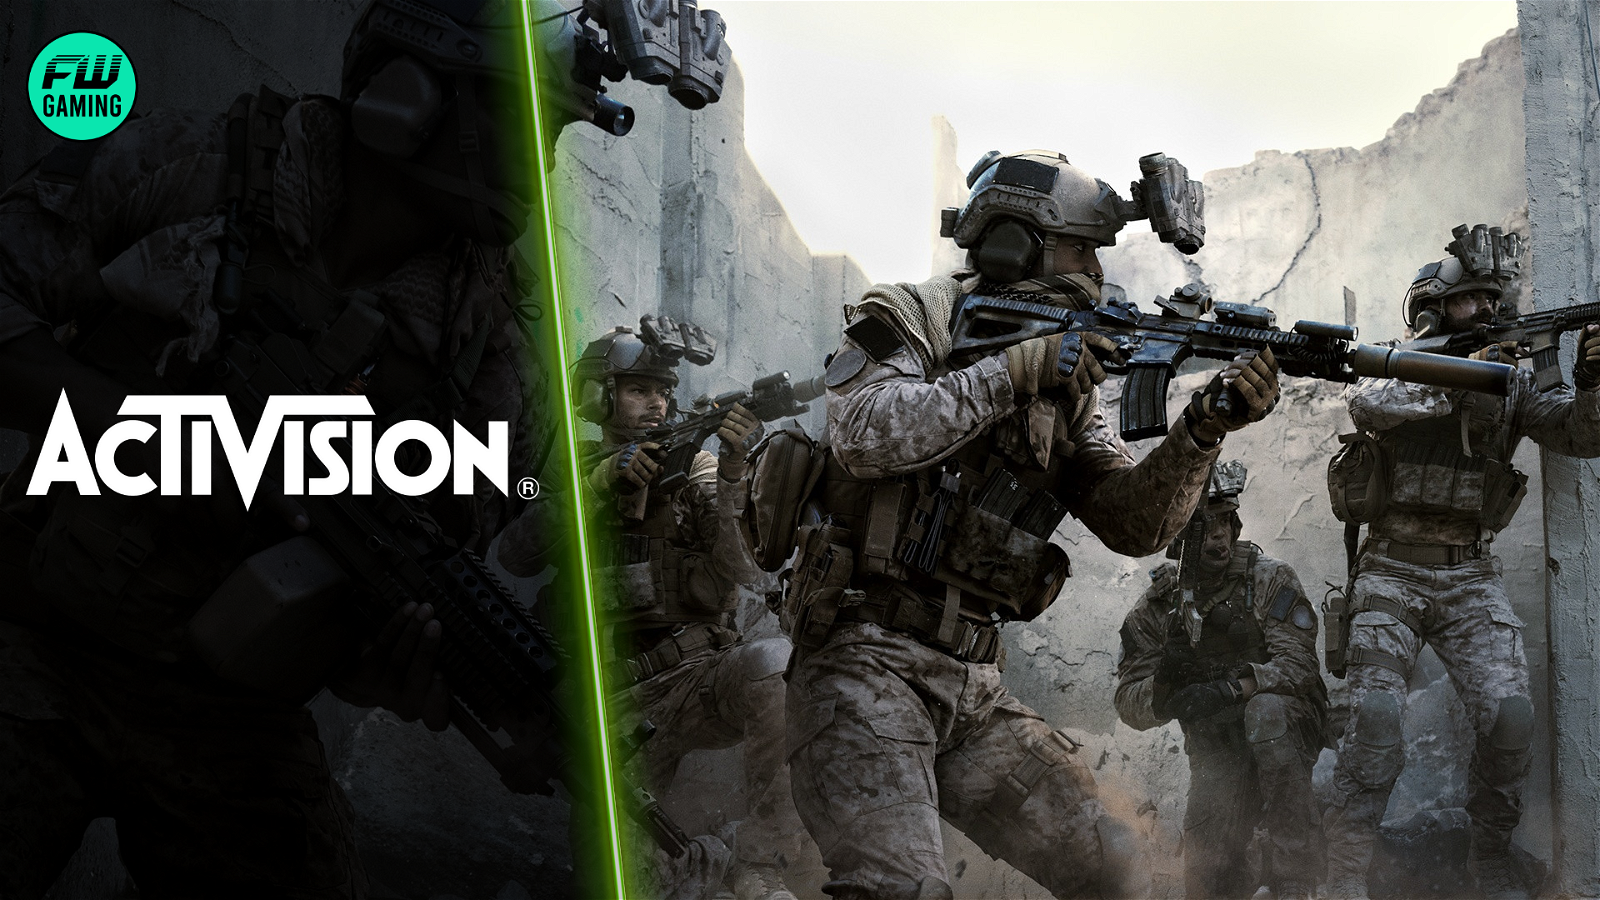 Activision Have Put the Prices up of Various Call of Duty Games